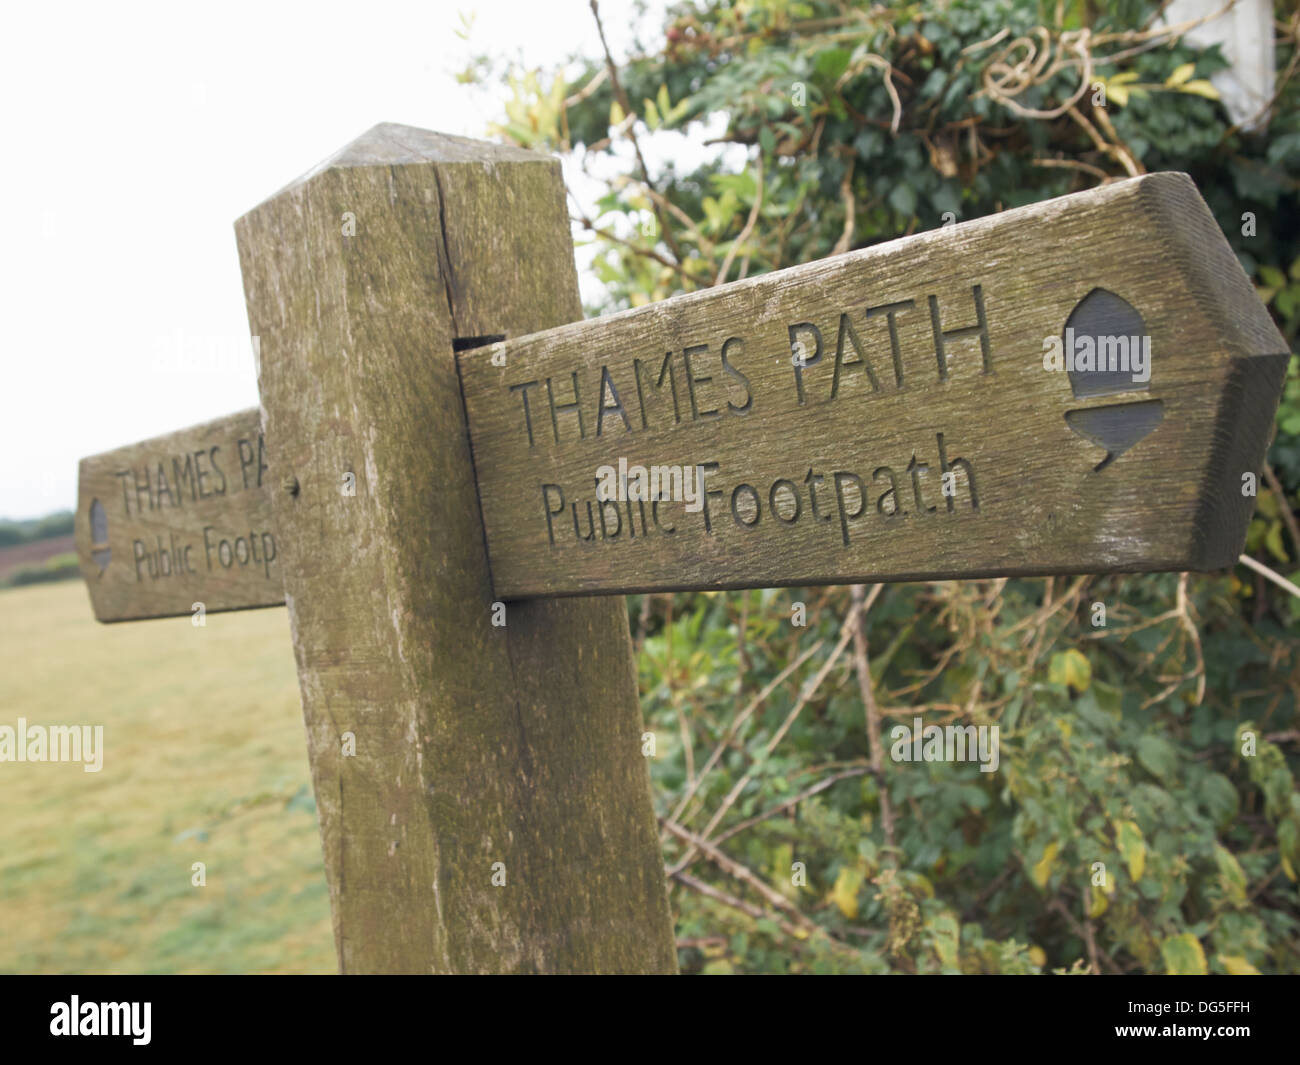 Thames Path Signe, Glocestershire, Angleterre Banque D'Images